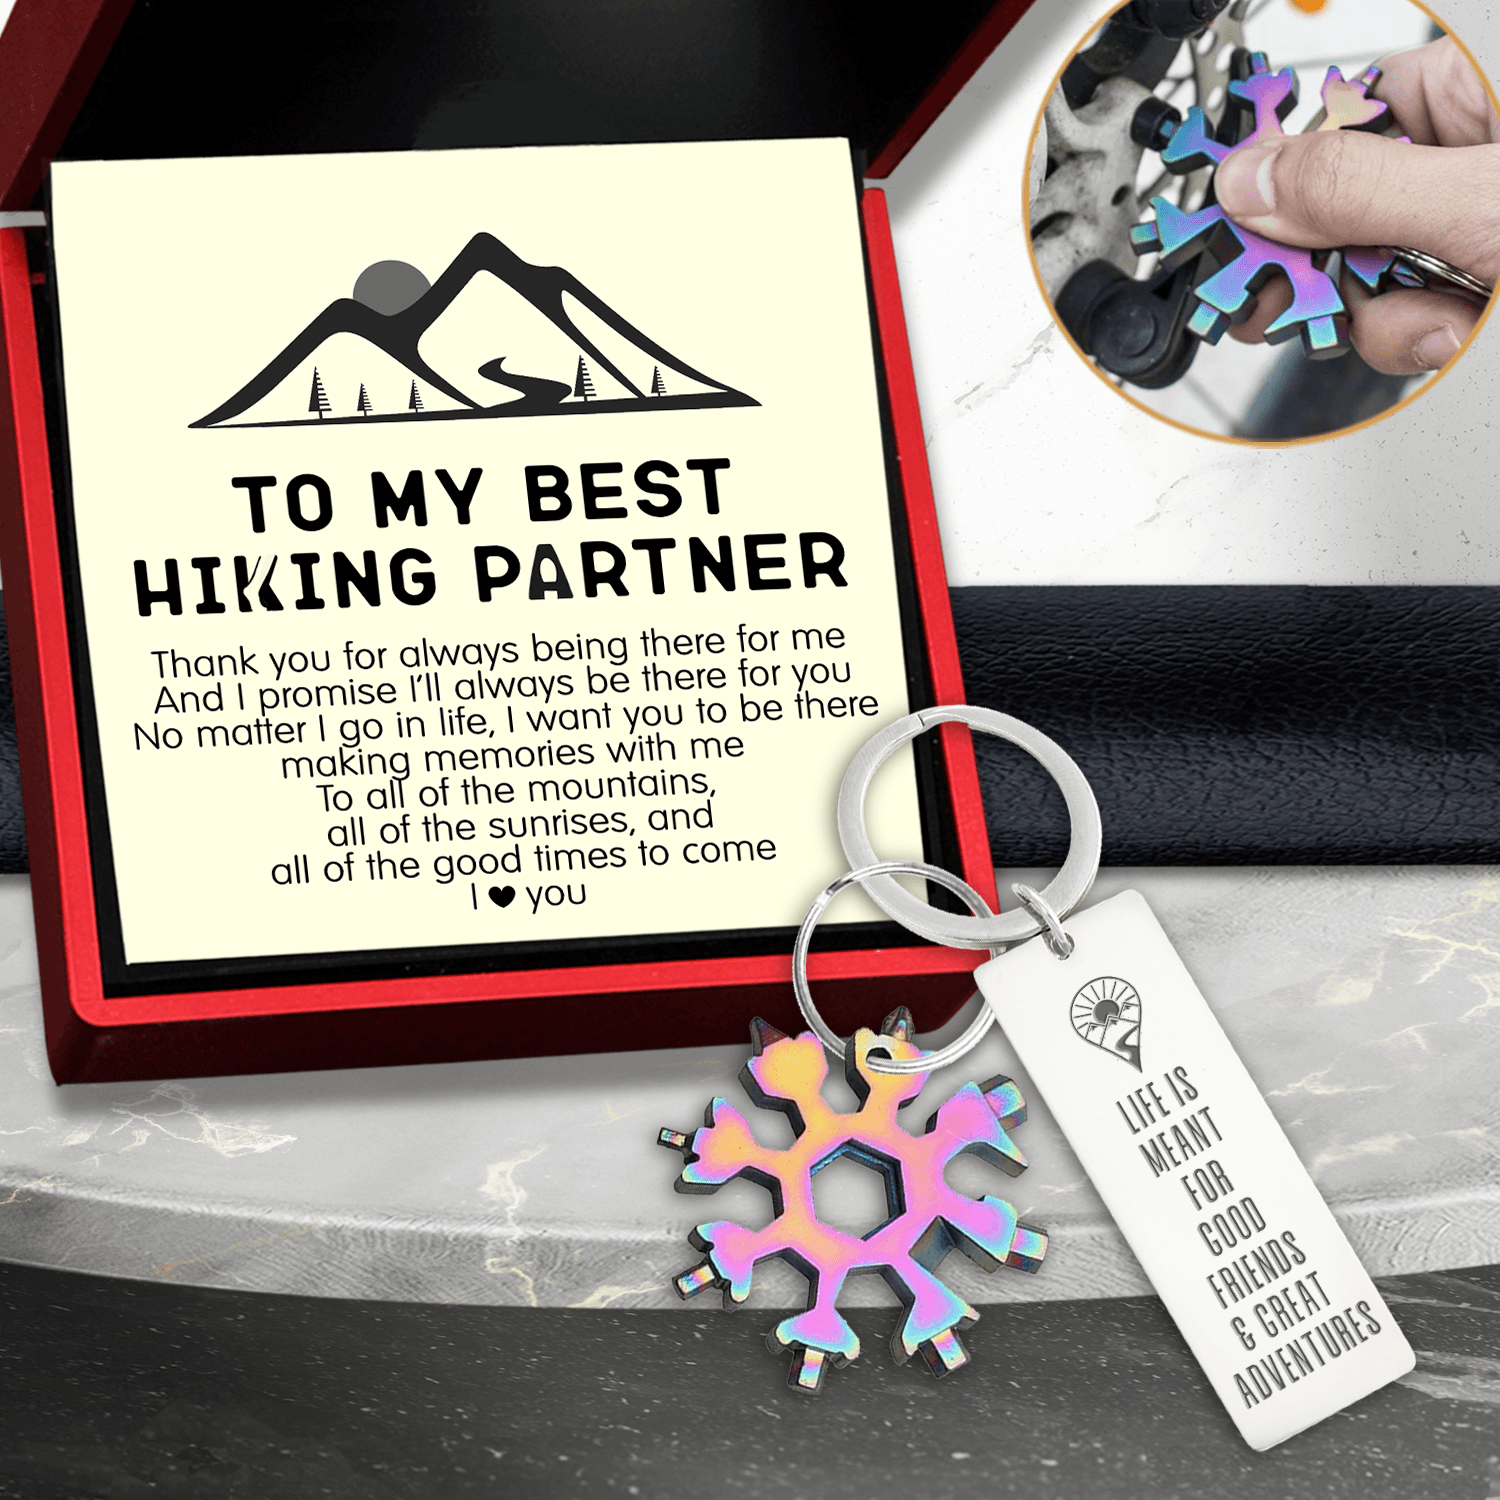 multitool keychain hiking to my best hiking partner life is meant for good friends and great adventures augktb33002 gifts holder 4